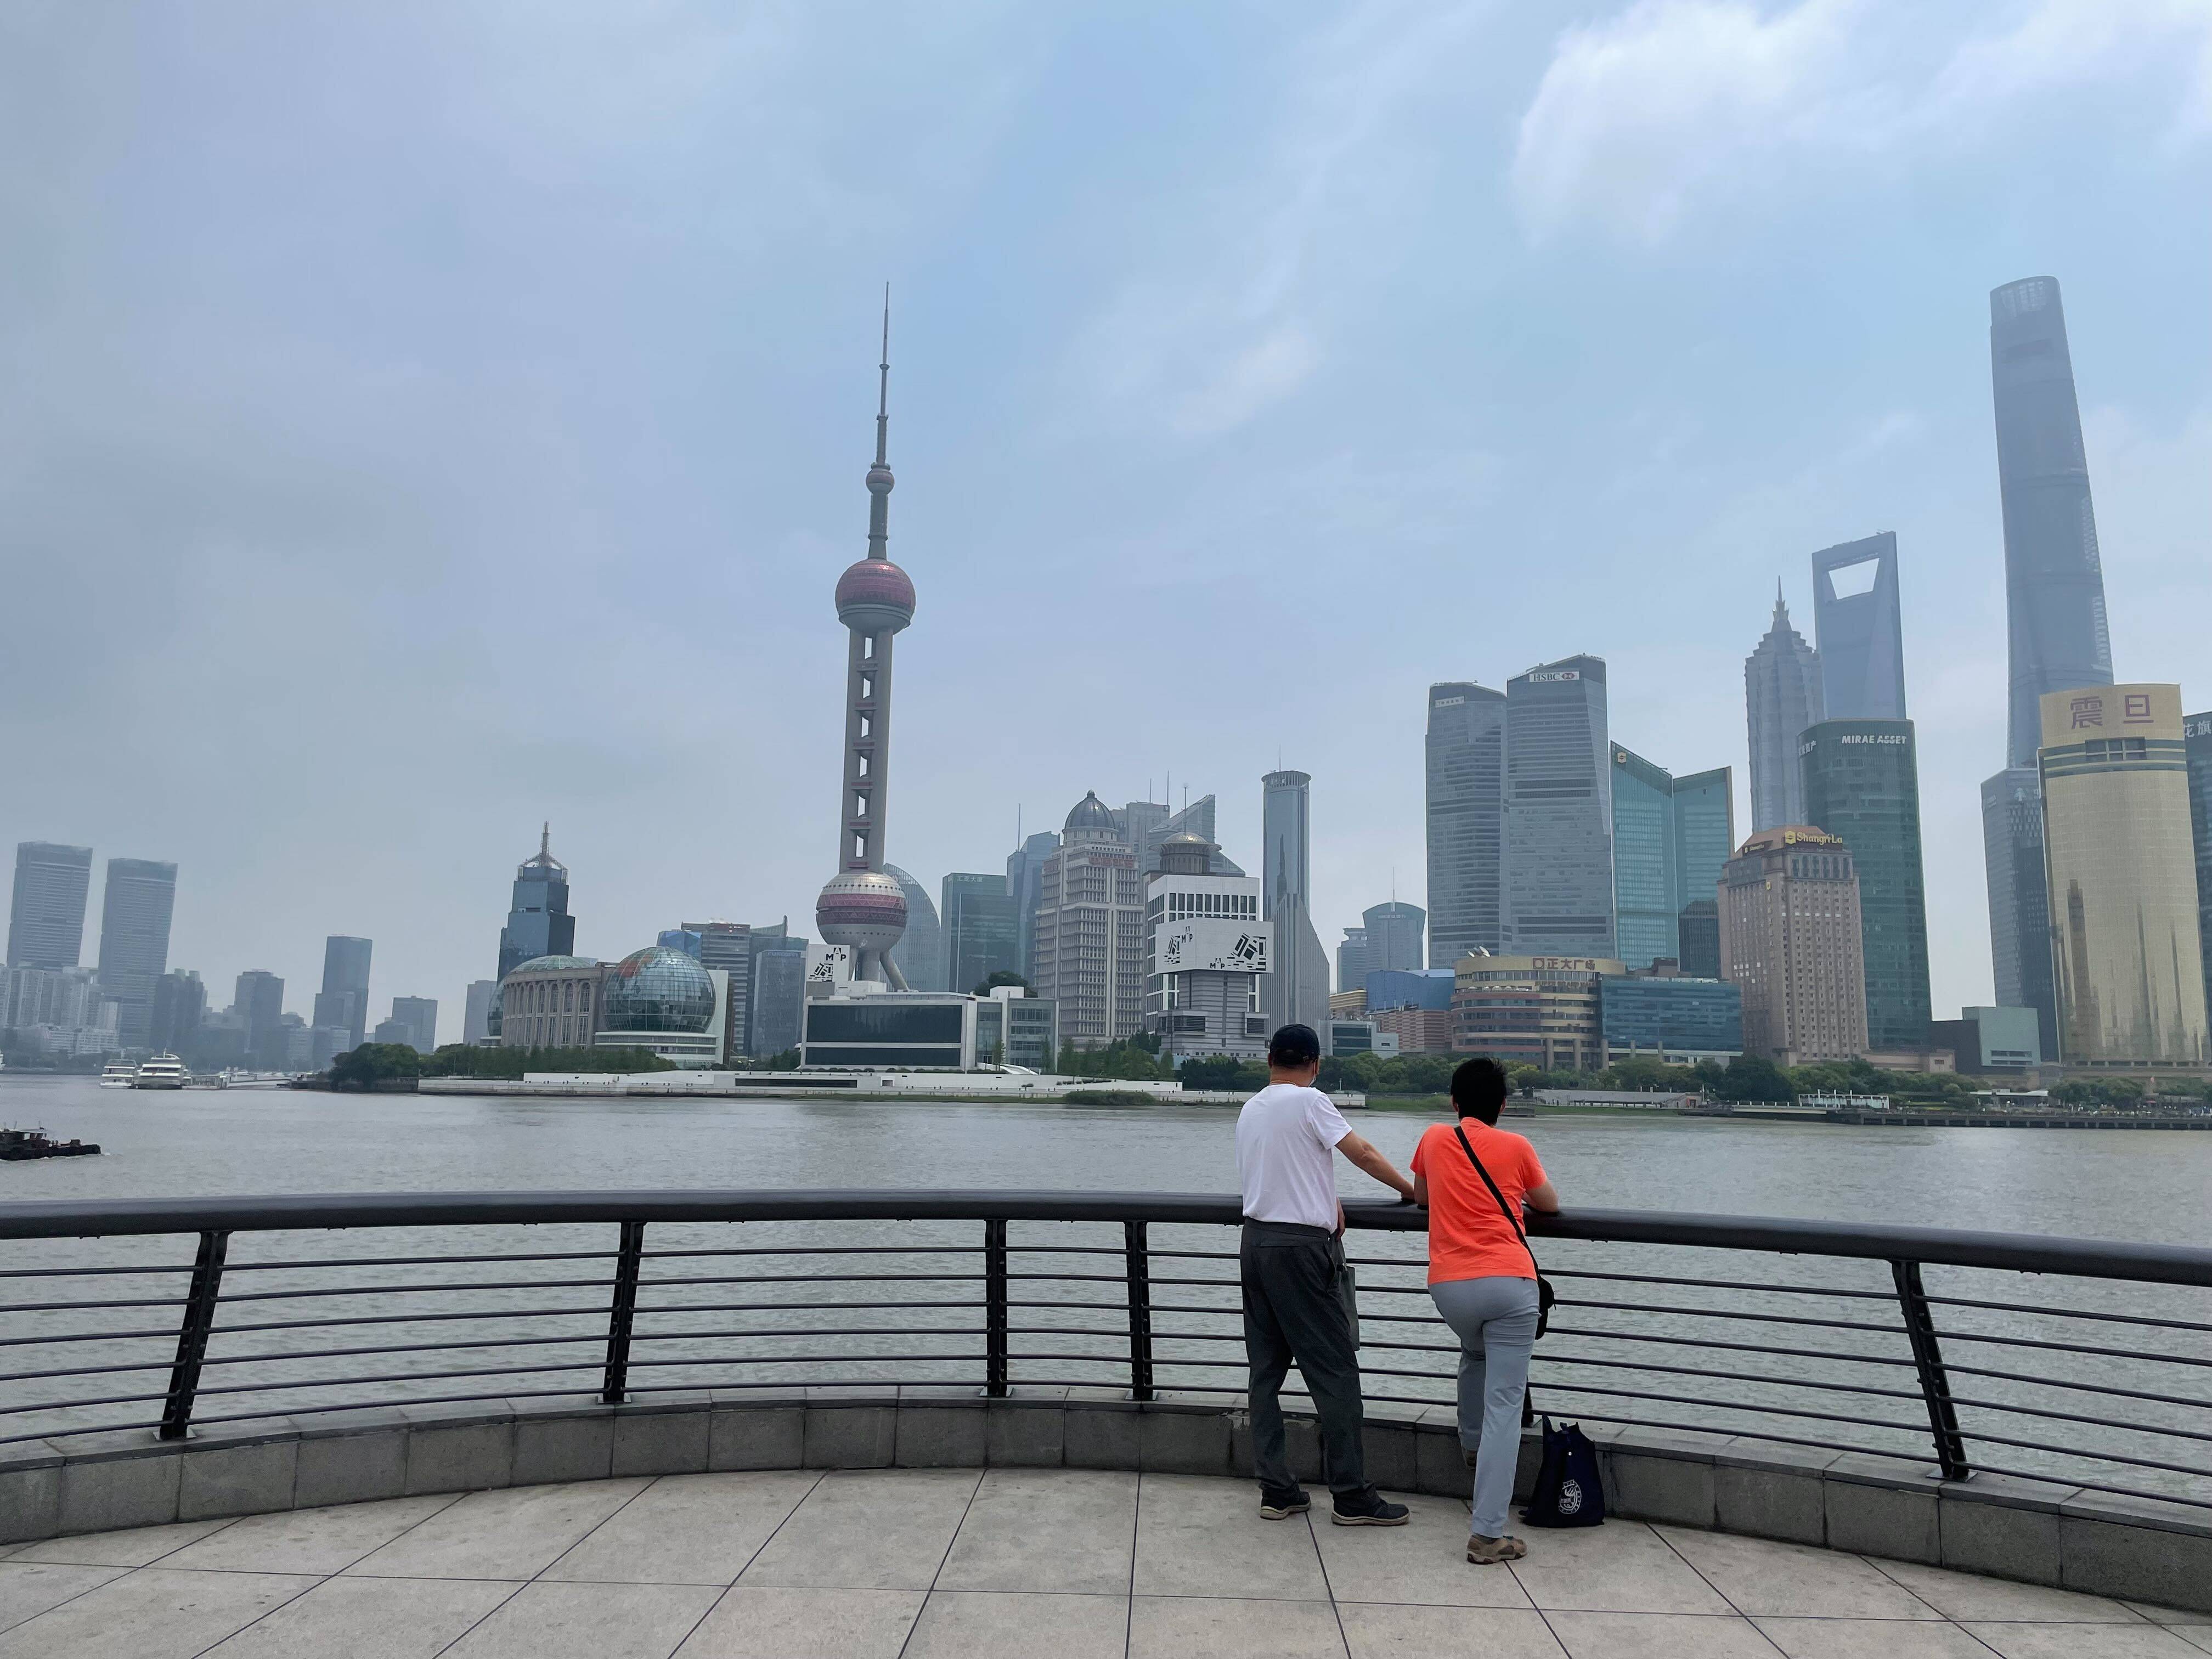 A view of the Lujiazui financial district from The Bund in Puxi, on the western bank of the Huangpu River that cuts through Shanghai. Photo: Tracy Qu